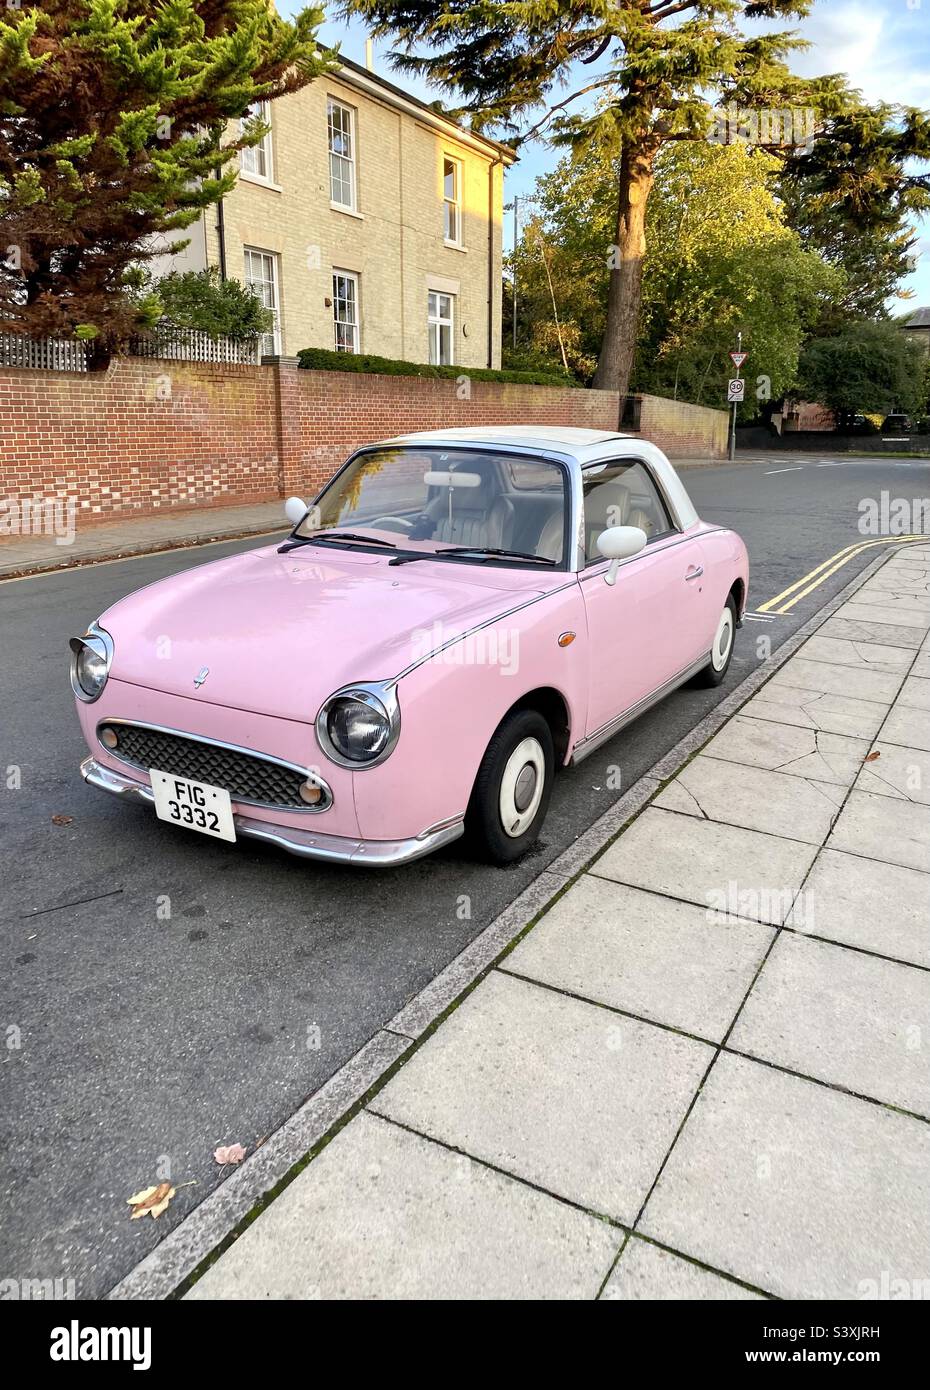 What a beautiful car! A pink Nissan Figaro parked in a residential street. Stock Photo